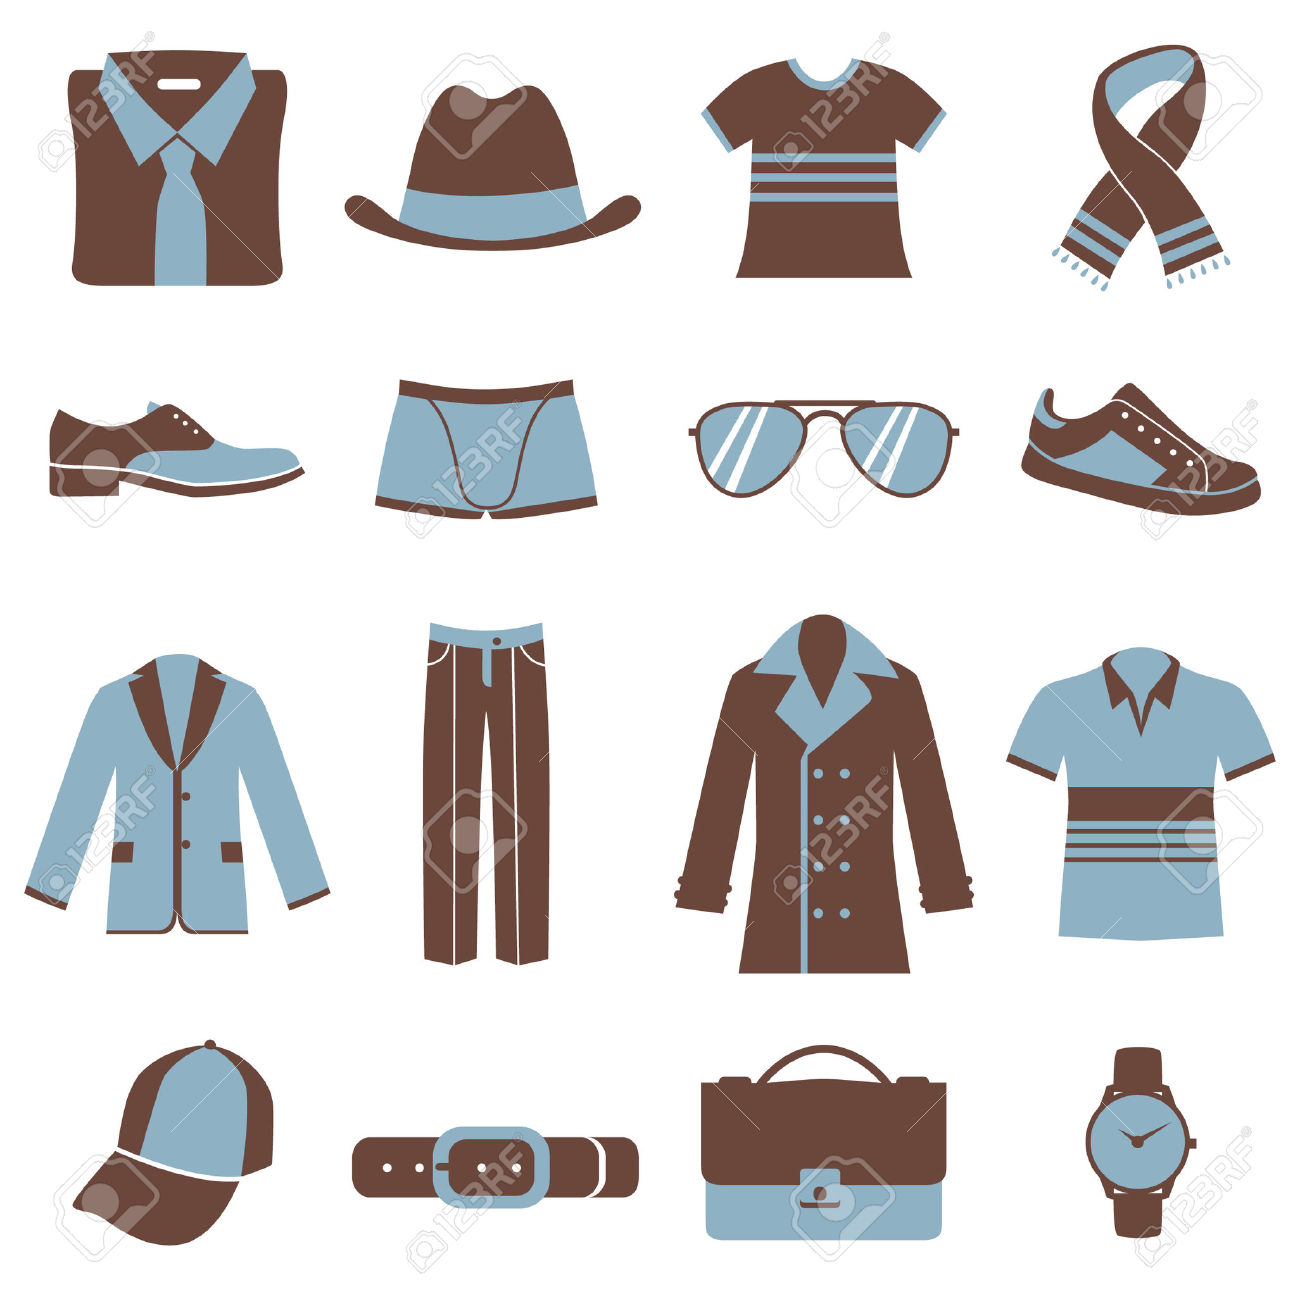 Men's clothing clipart - Clipground